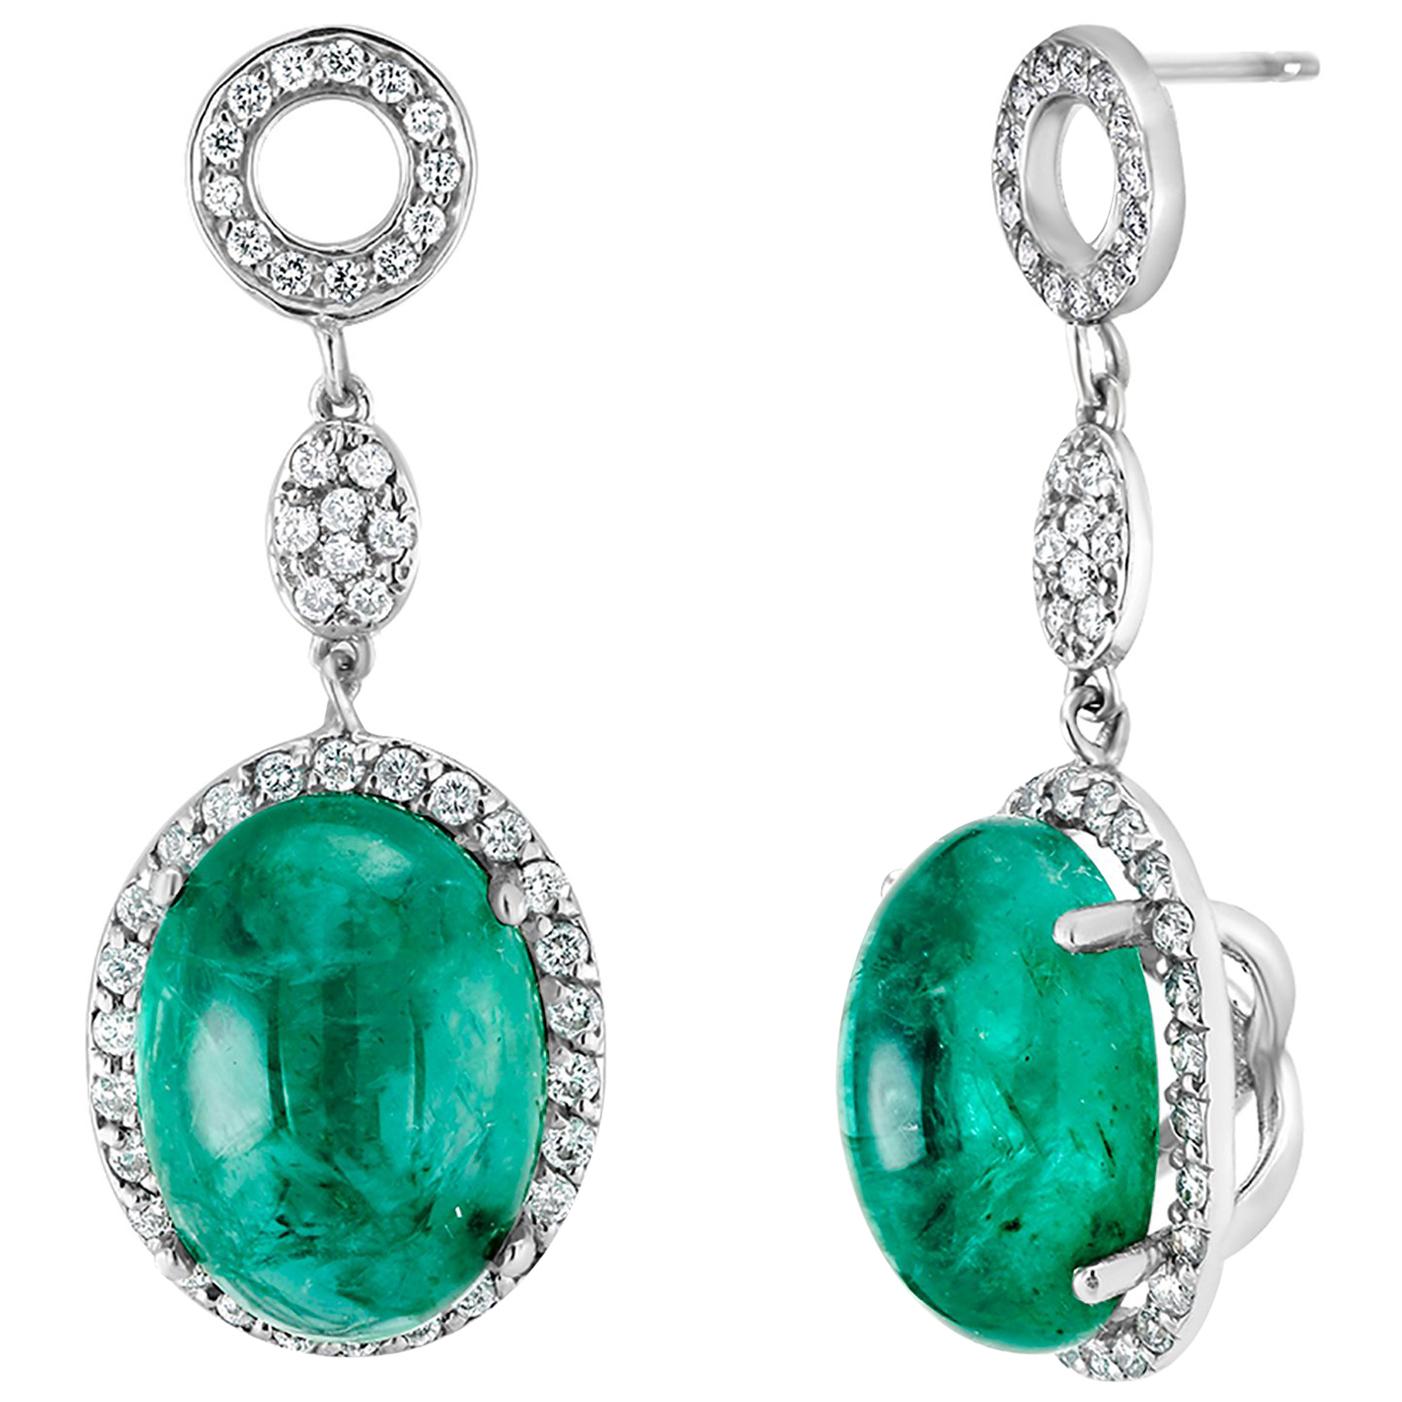 Cabochon Emerald and Diamond Drop White Gold Earrings Weighing 14.21 Carat